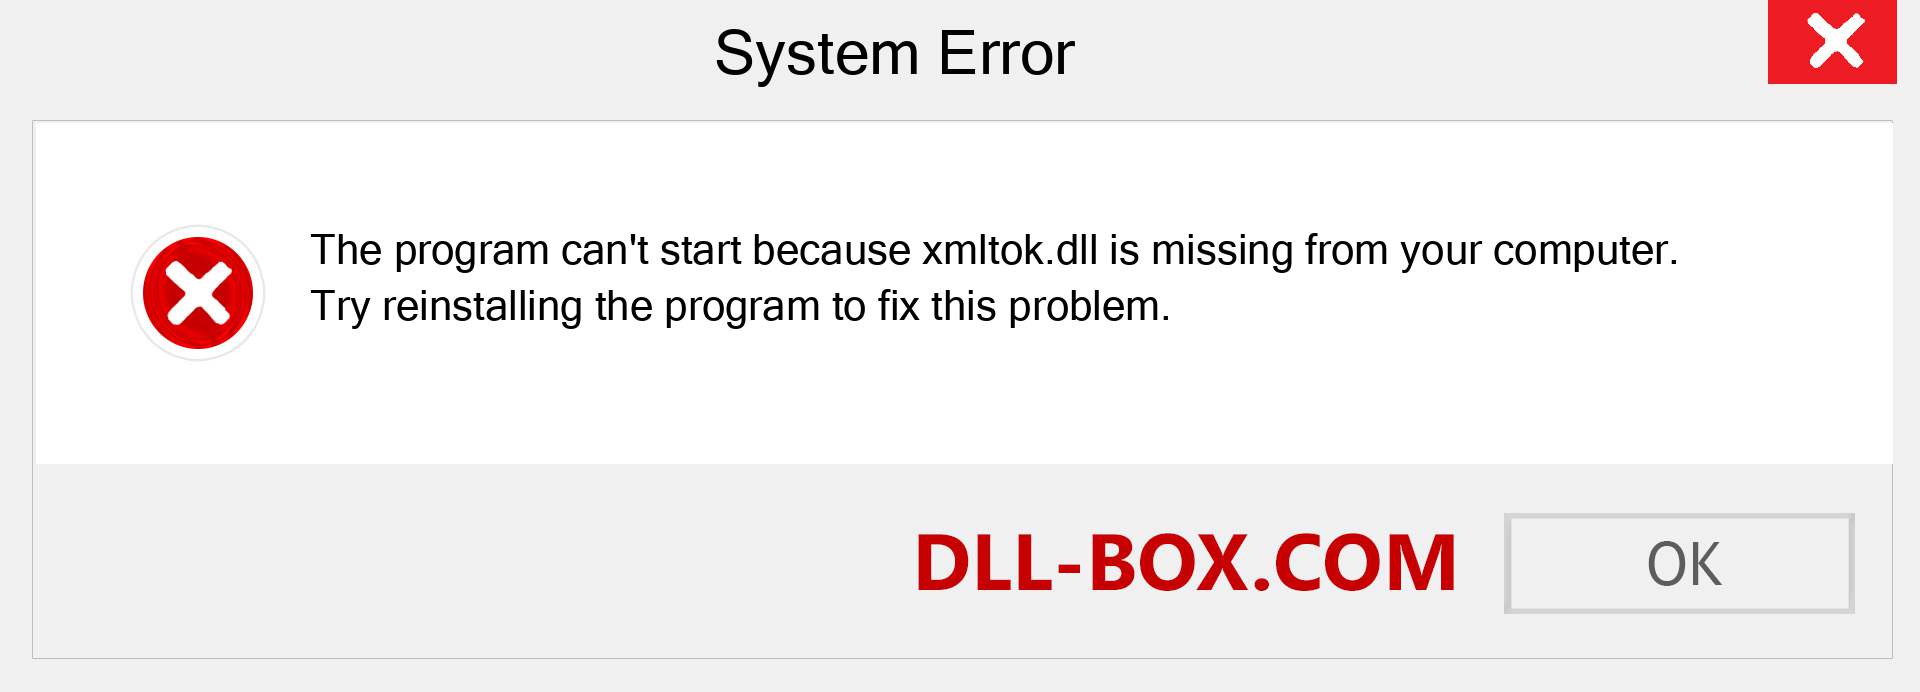  xmltok.dll file is missing?. Download for Windows 7, 8, 10 - Fix  xmltok dll Missing Error on Windows, photos, images